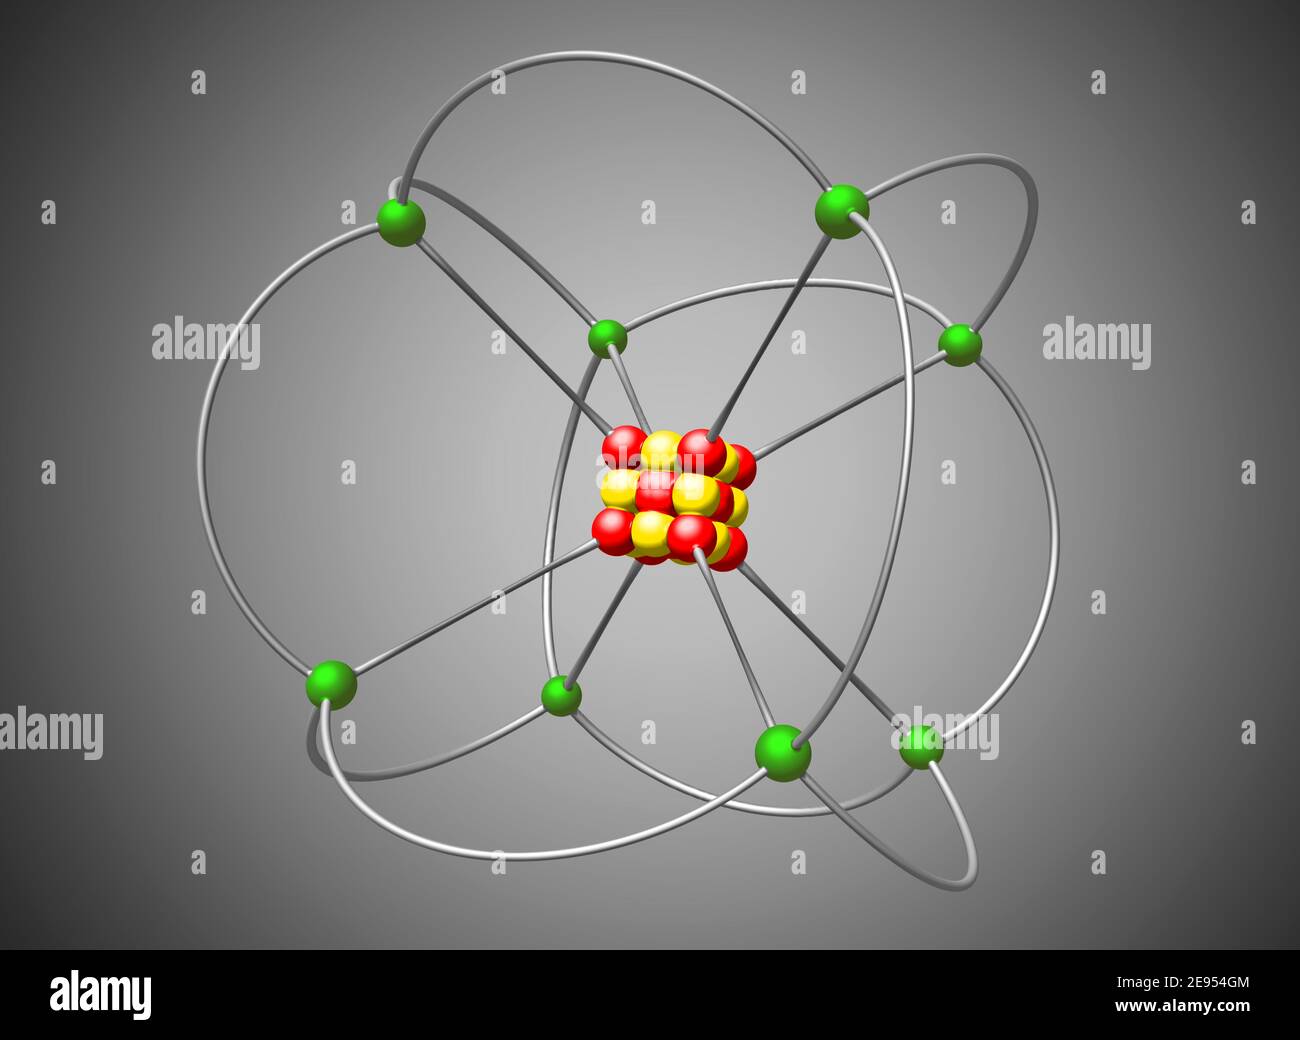 real atomic structure model